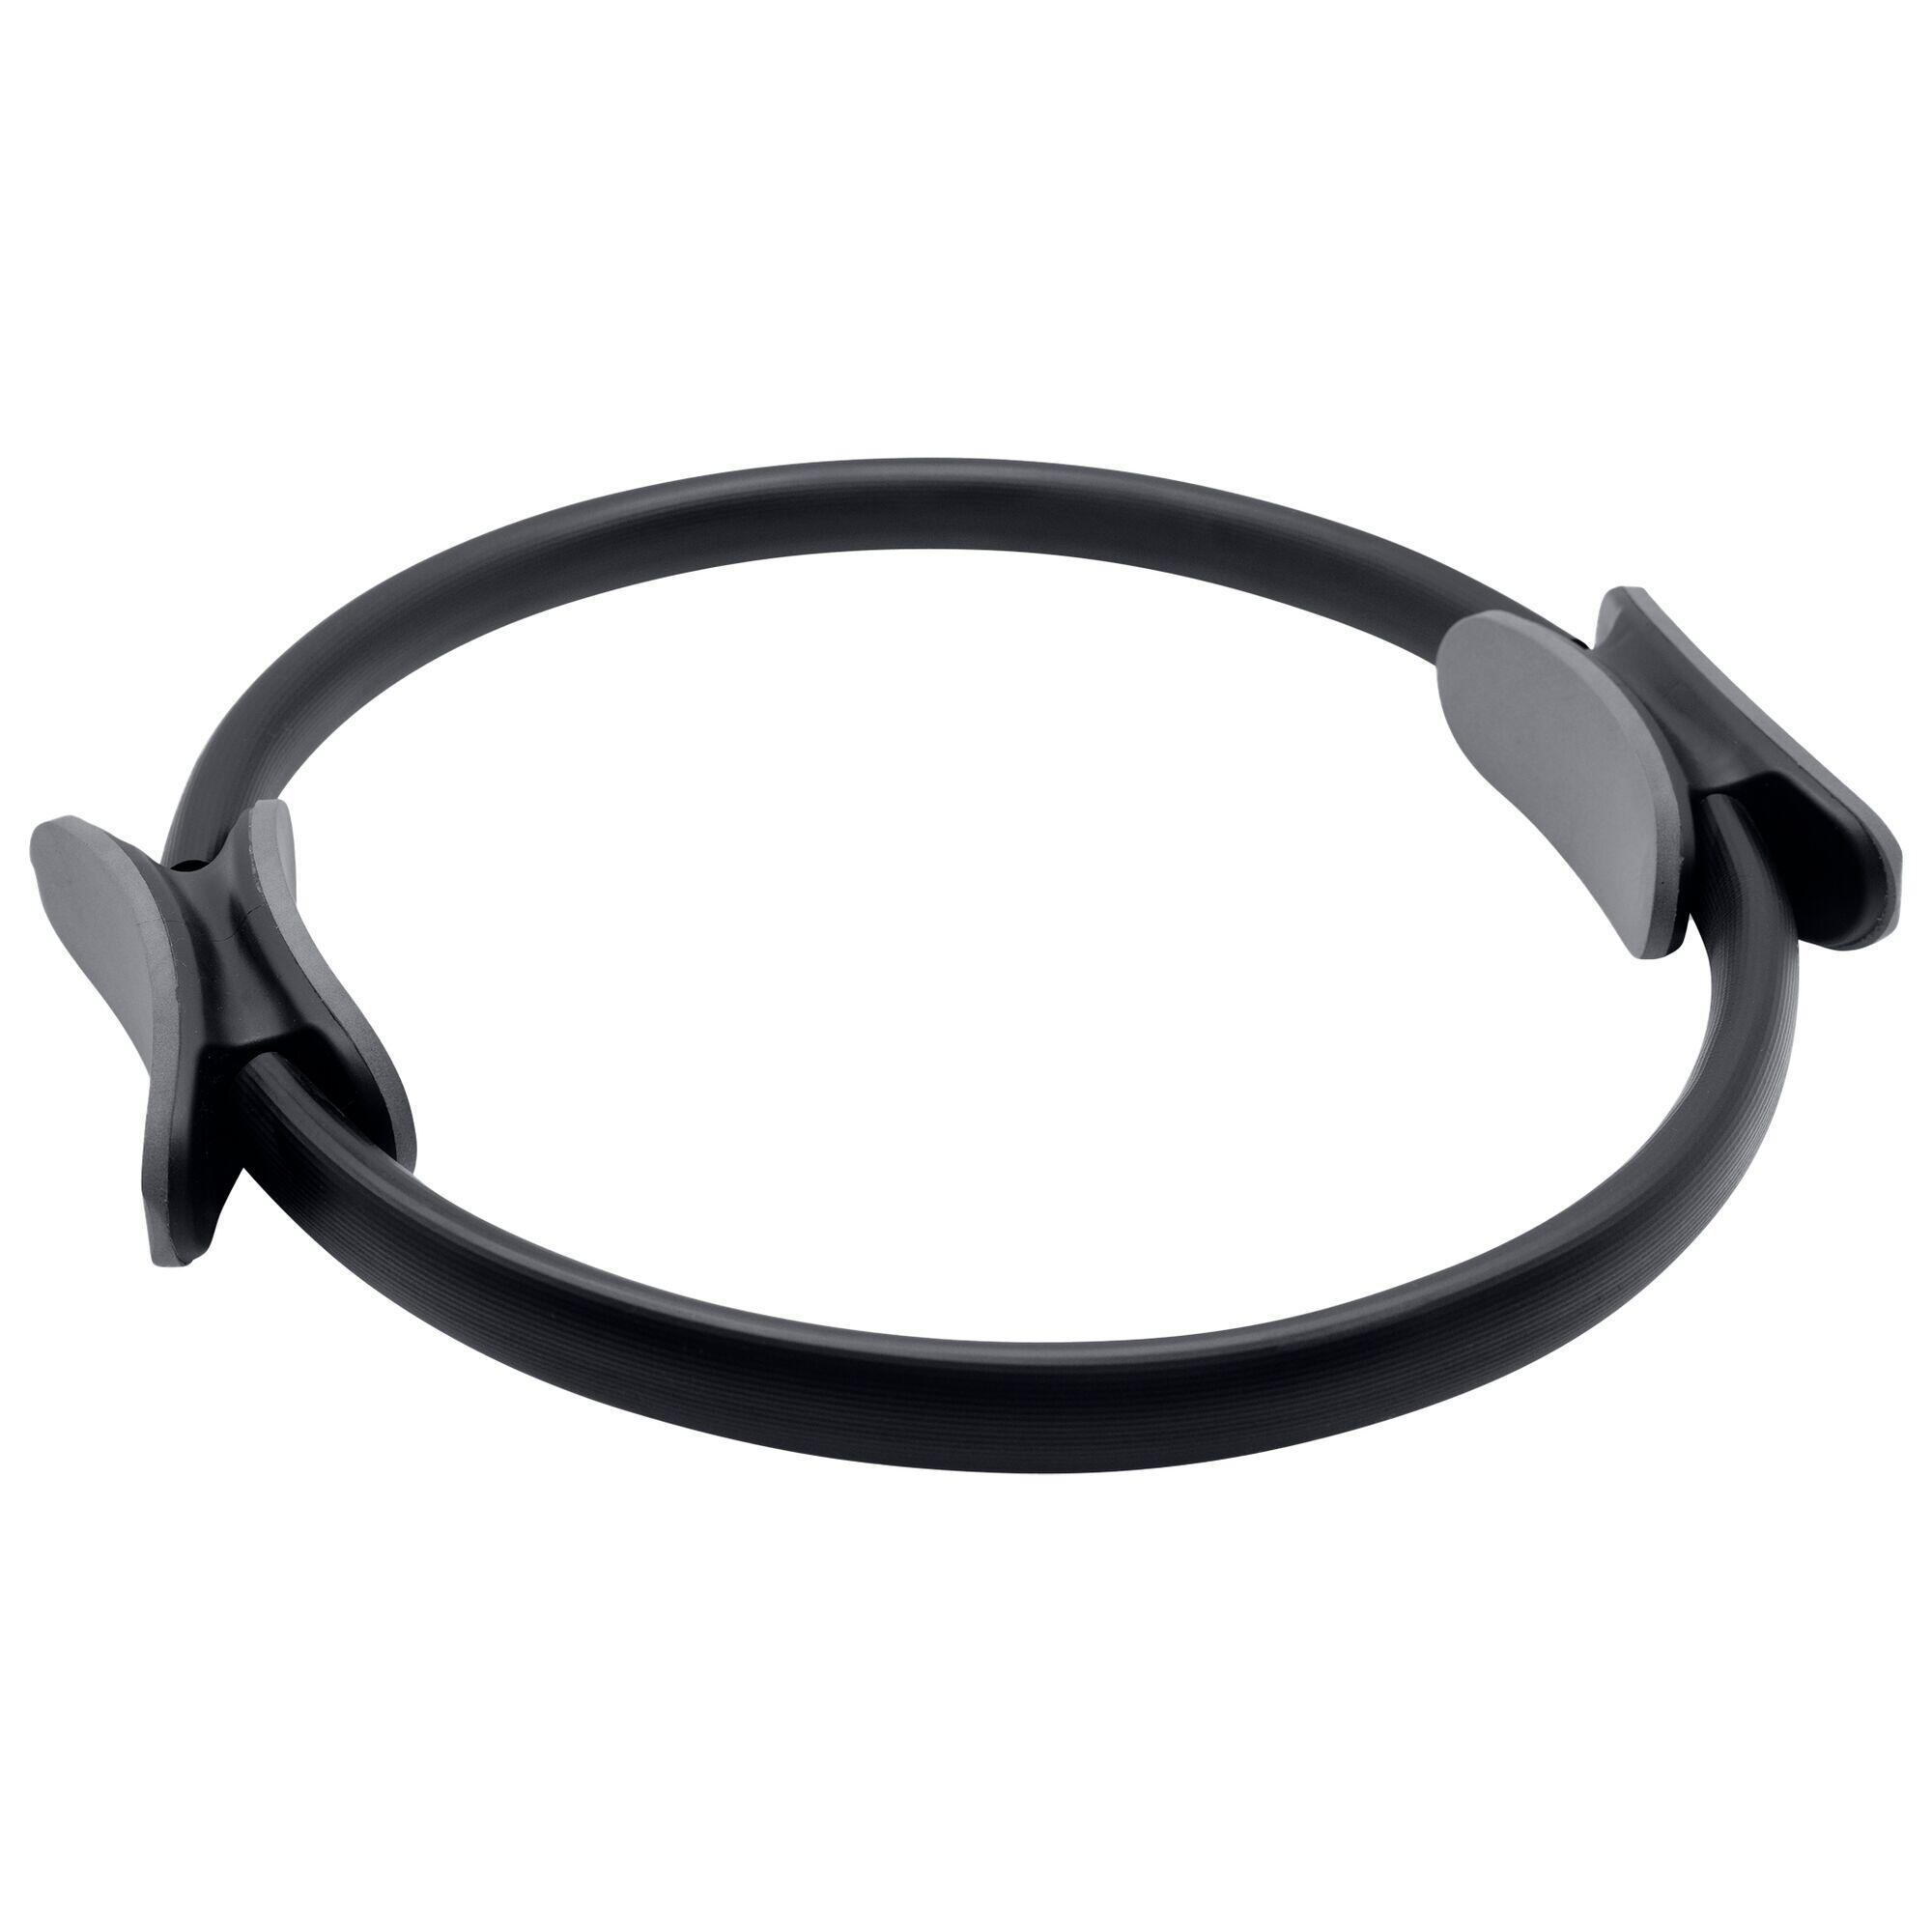 Adults' Home Fitness Pilates Ring - Black 3/3